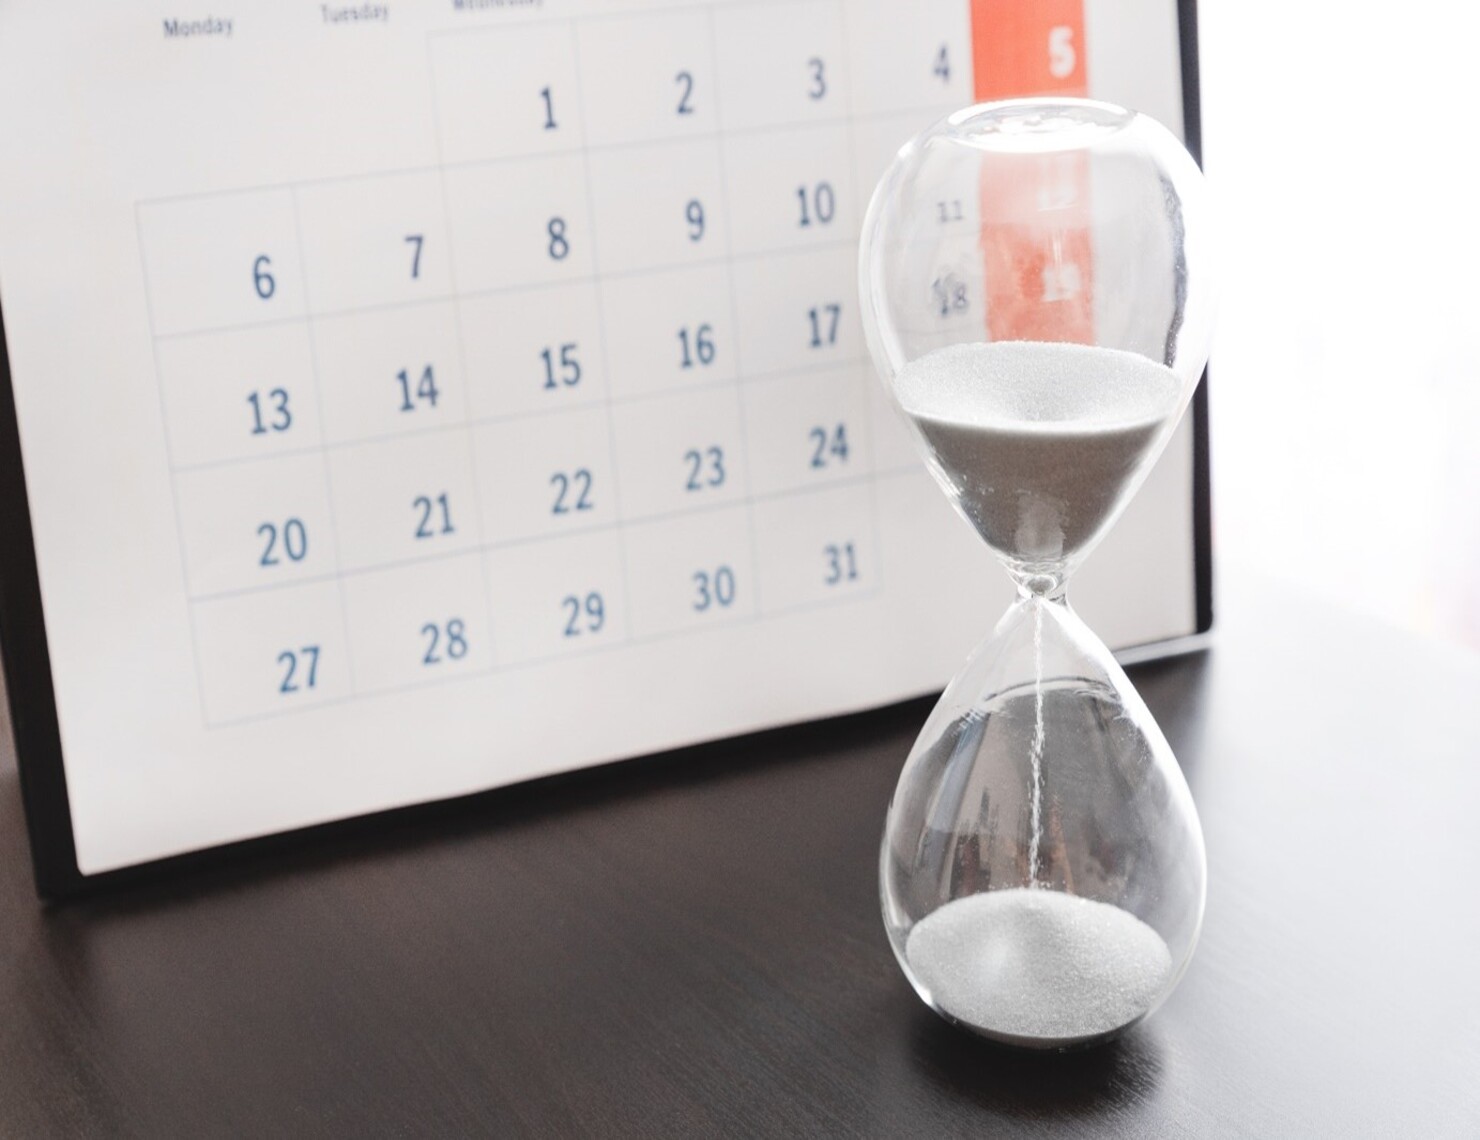 hourglass in front of calendar page, representing end-of-the-month demand signal distortion